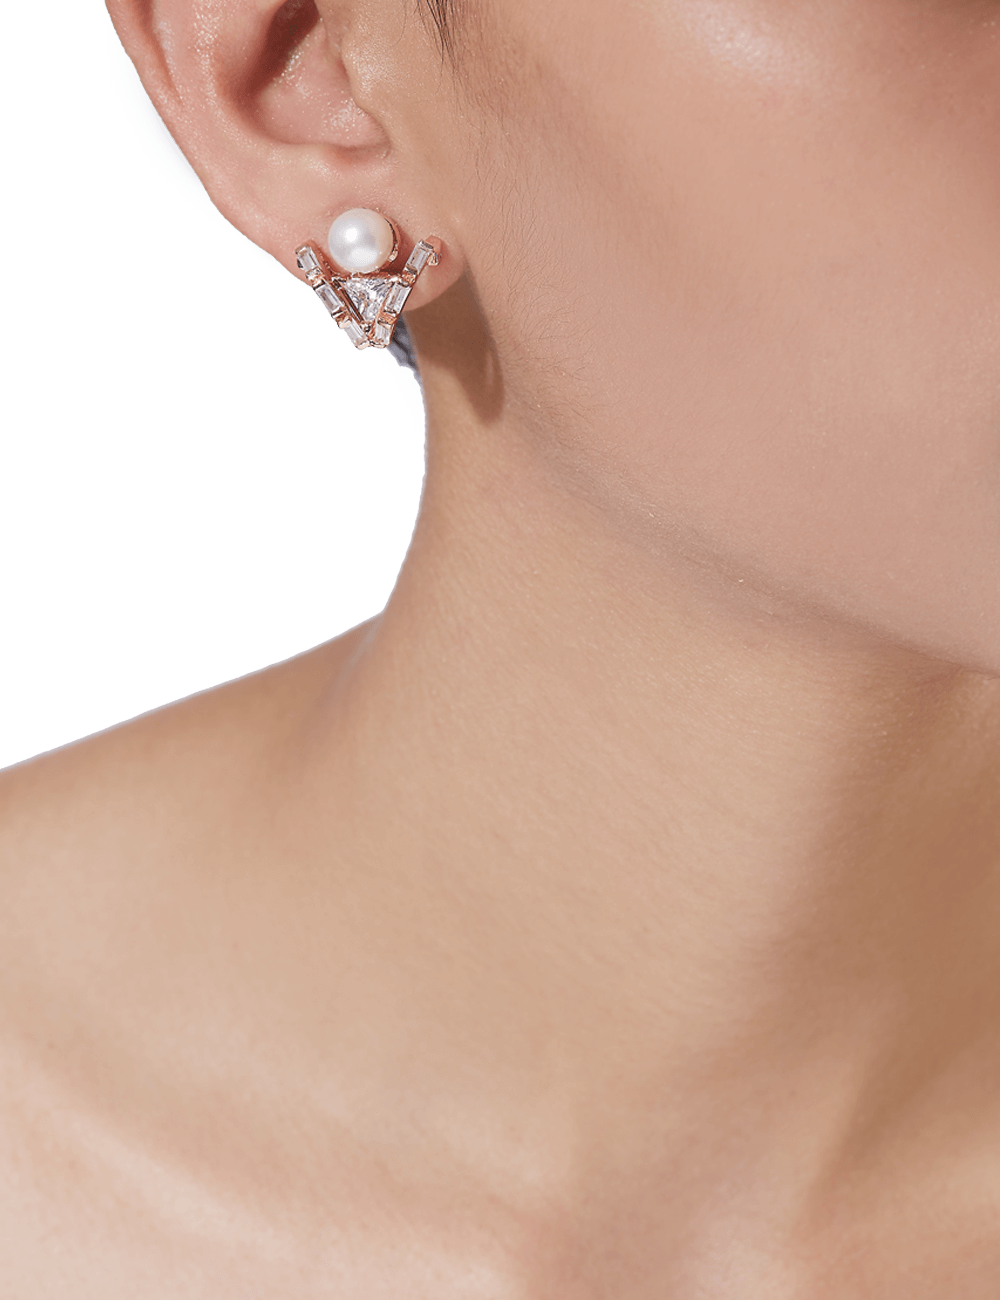 Styling Ladies Day Dresses With Women's Designer Earrings | Our Blog -  Joshua James Jewellery